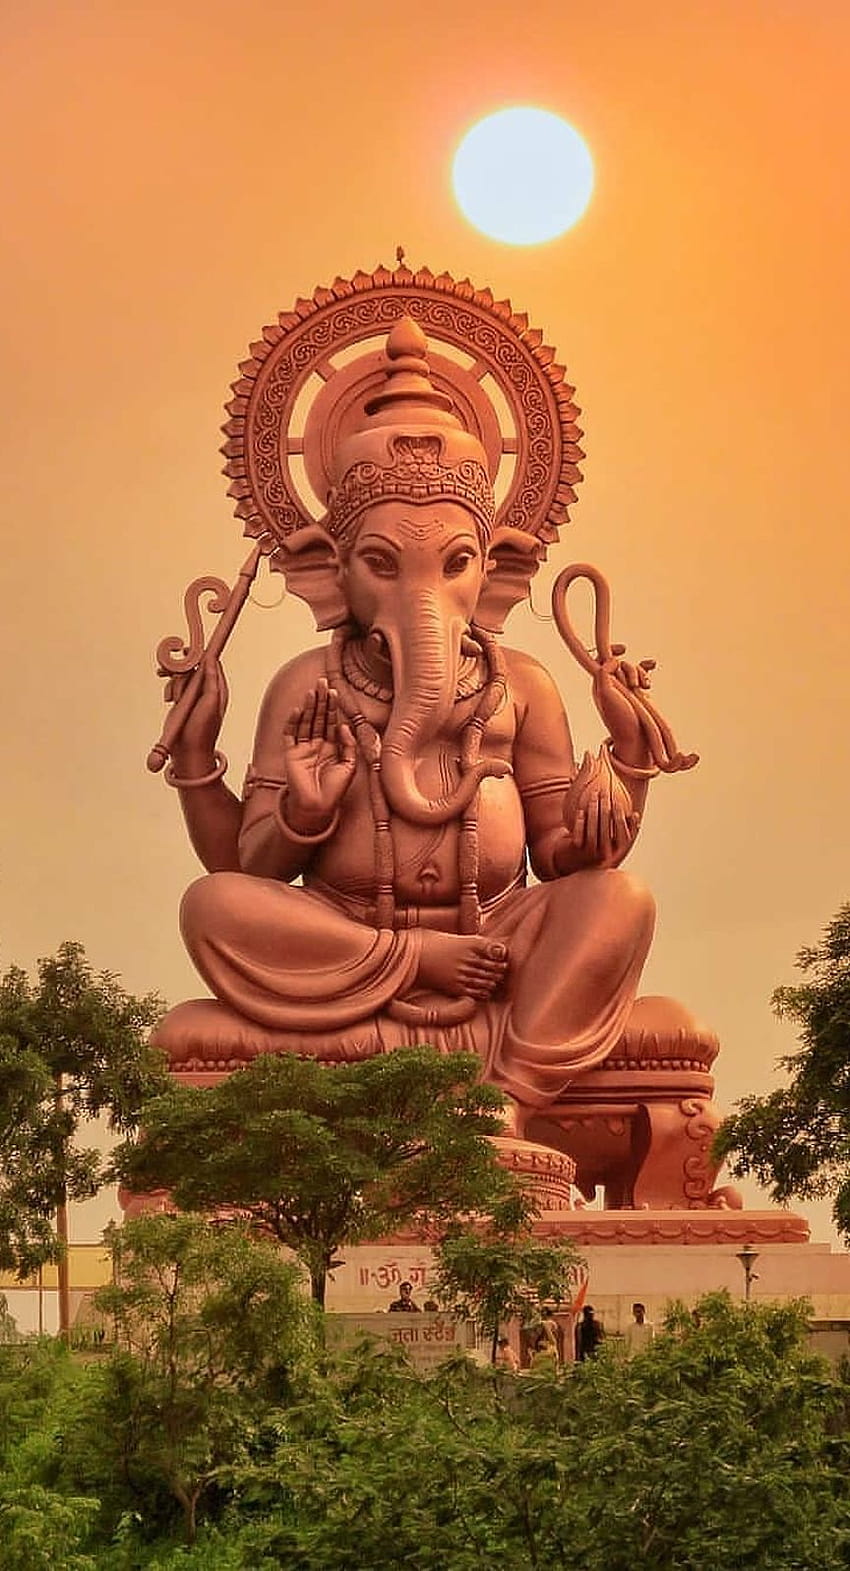 Praveen Mohan - Yoga is very important! This avatar is called 'Yoga  Ganapathi' where Ganesha is shown in Monk Mode. Look at the band on his  legs and how is sitting in